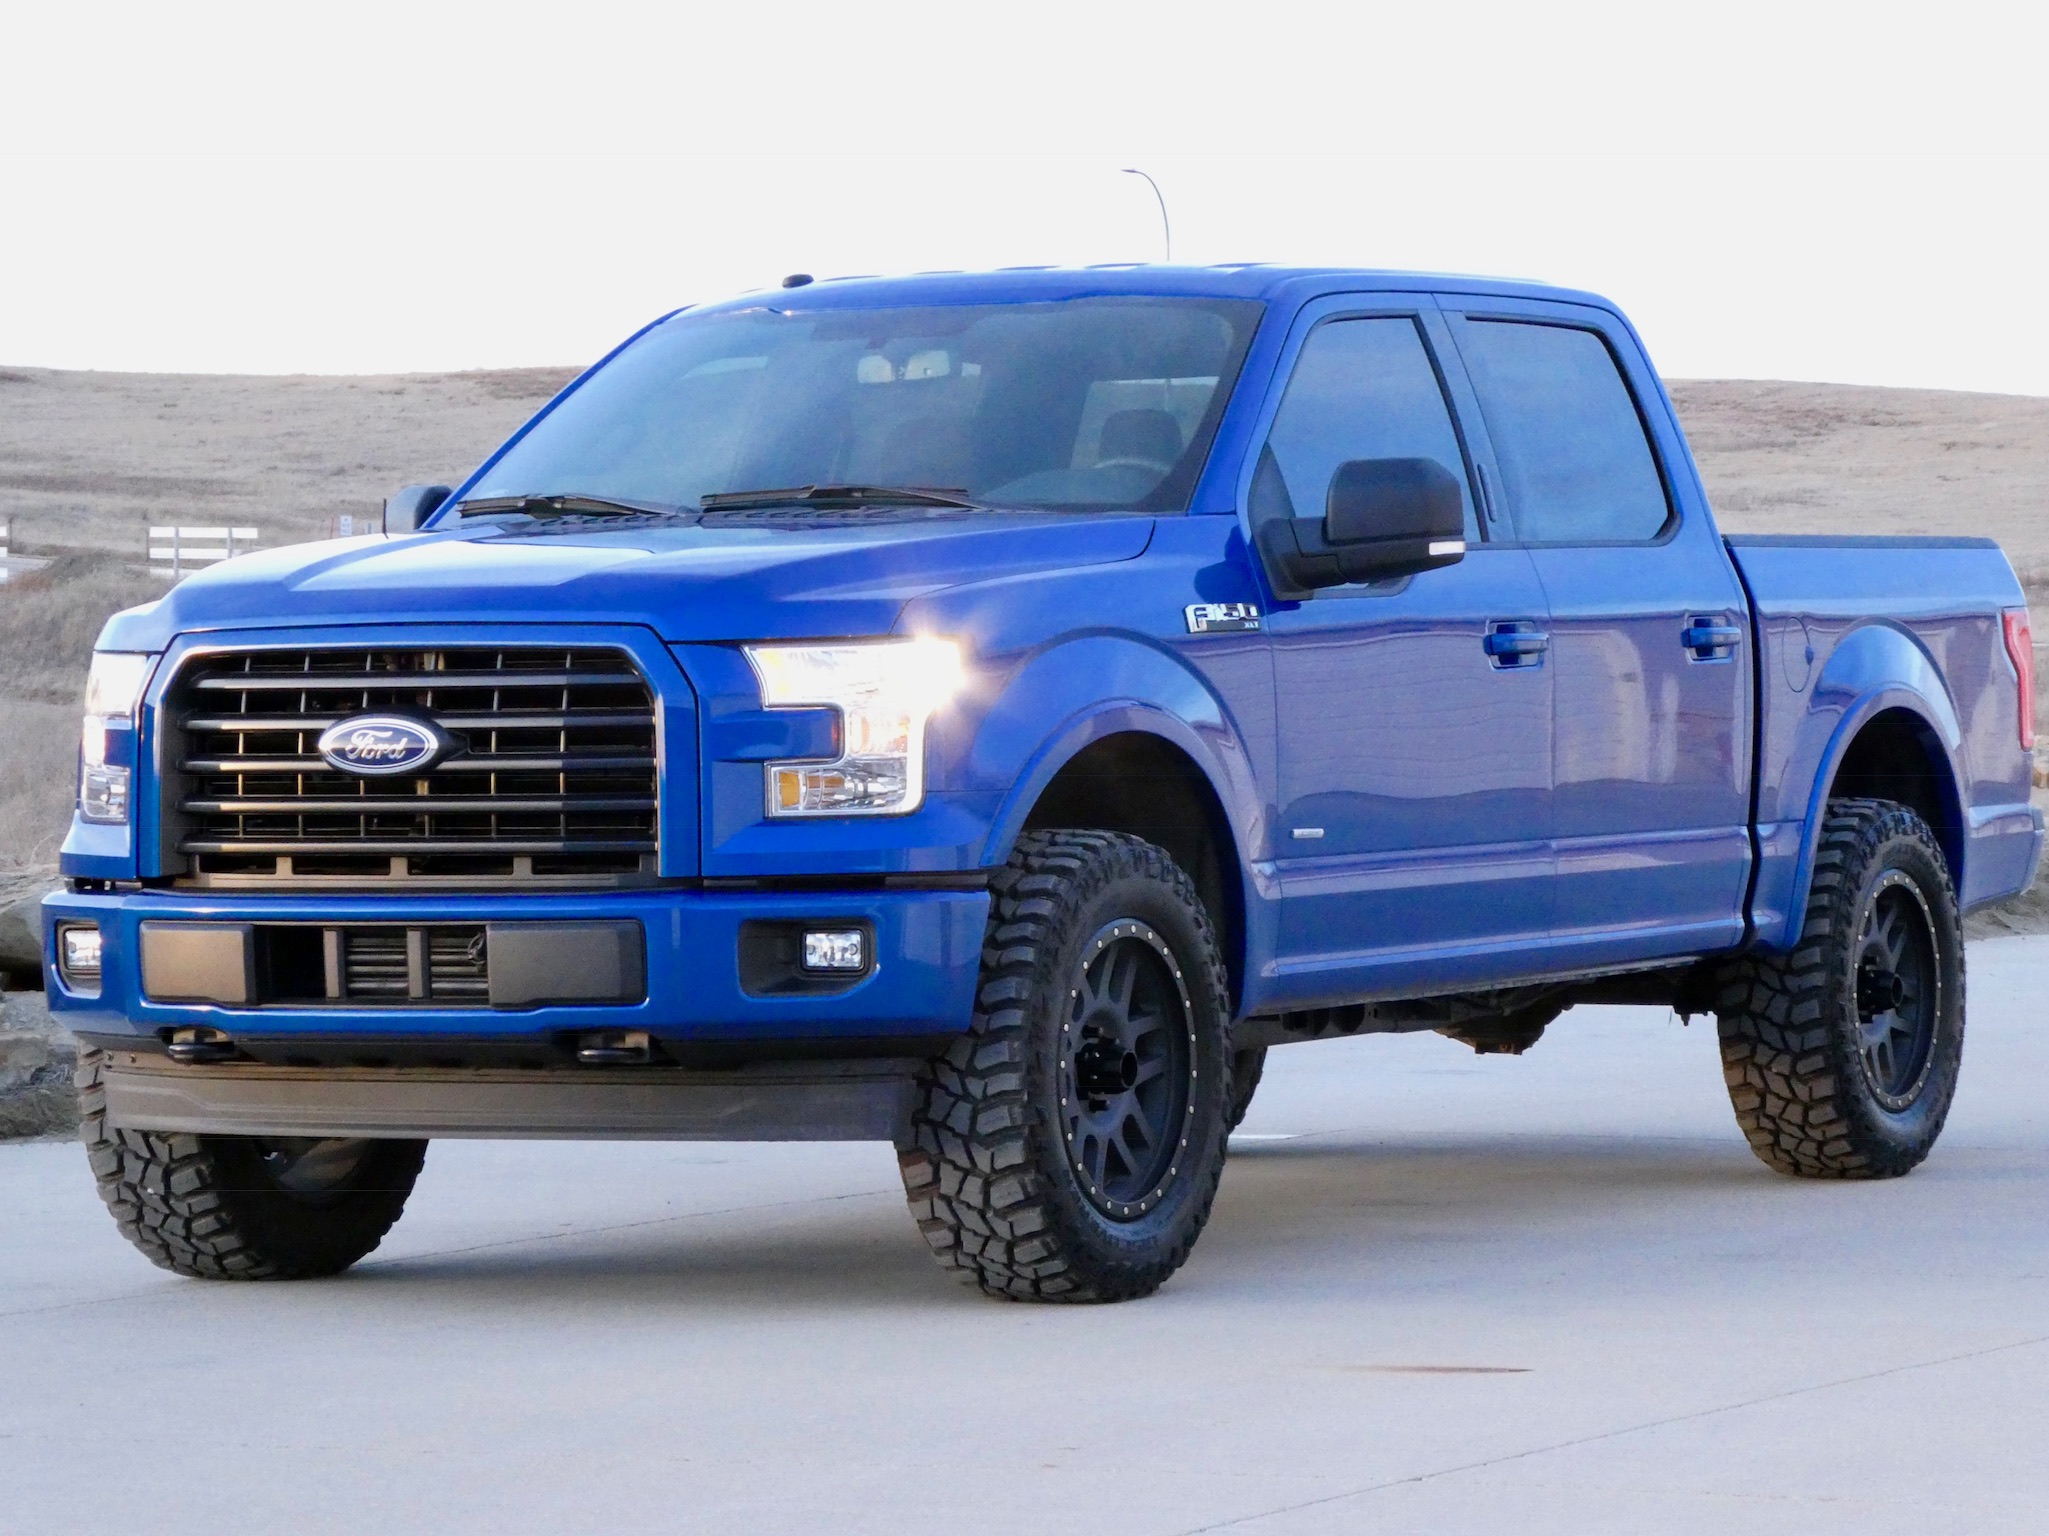 Lightning Blue!! - Damn that's one gorgeous color - Show yours please. -  Page 2 - Ford F150 Forum - Community of Ford Truck Fans